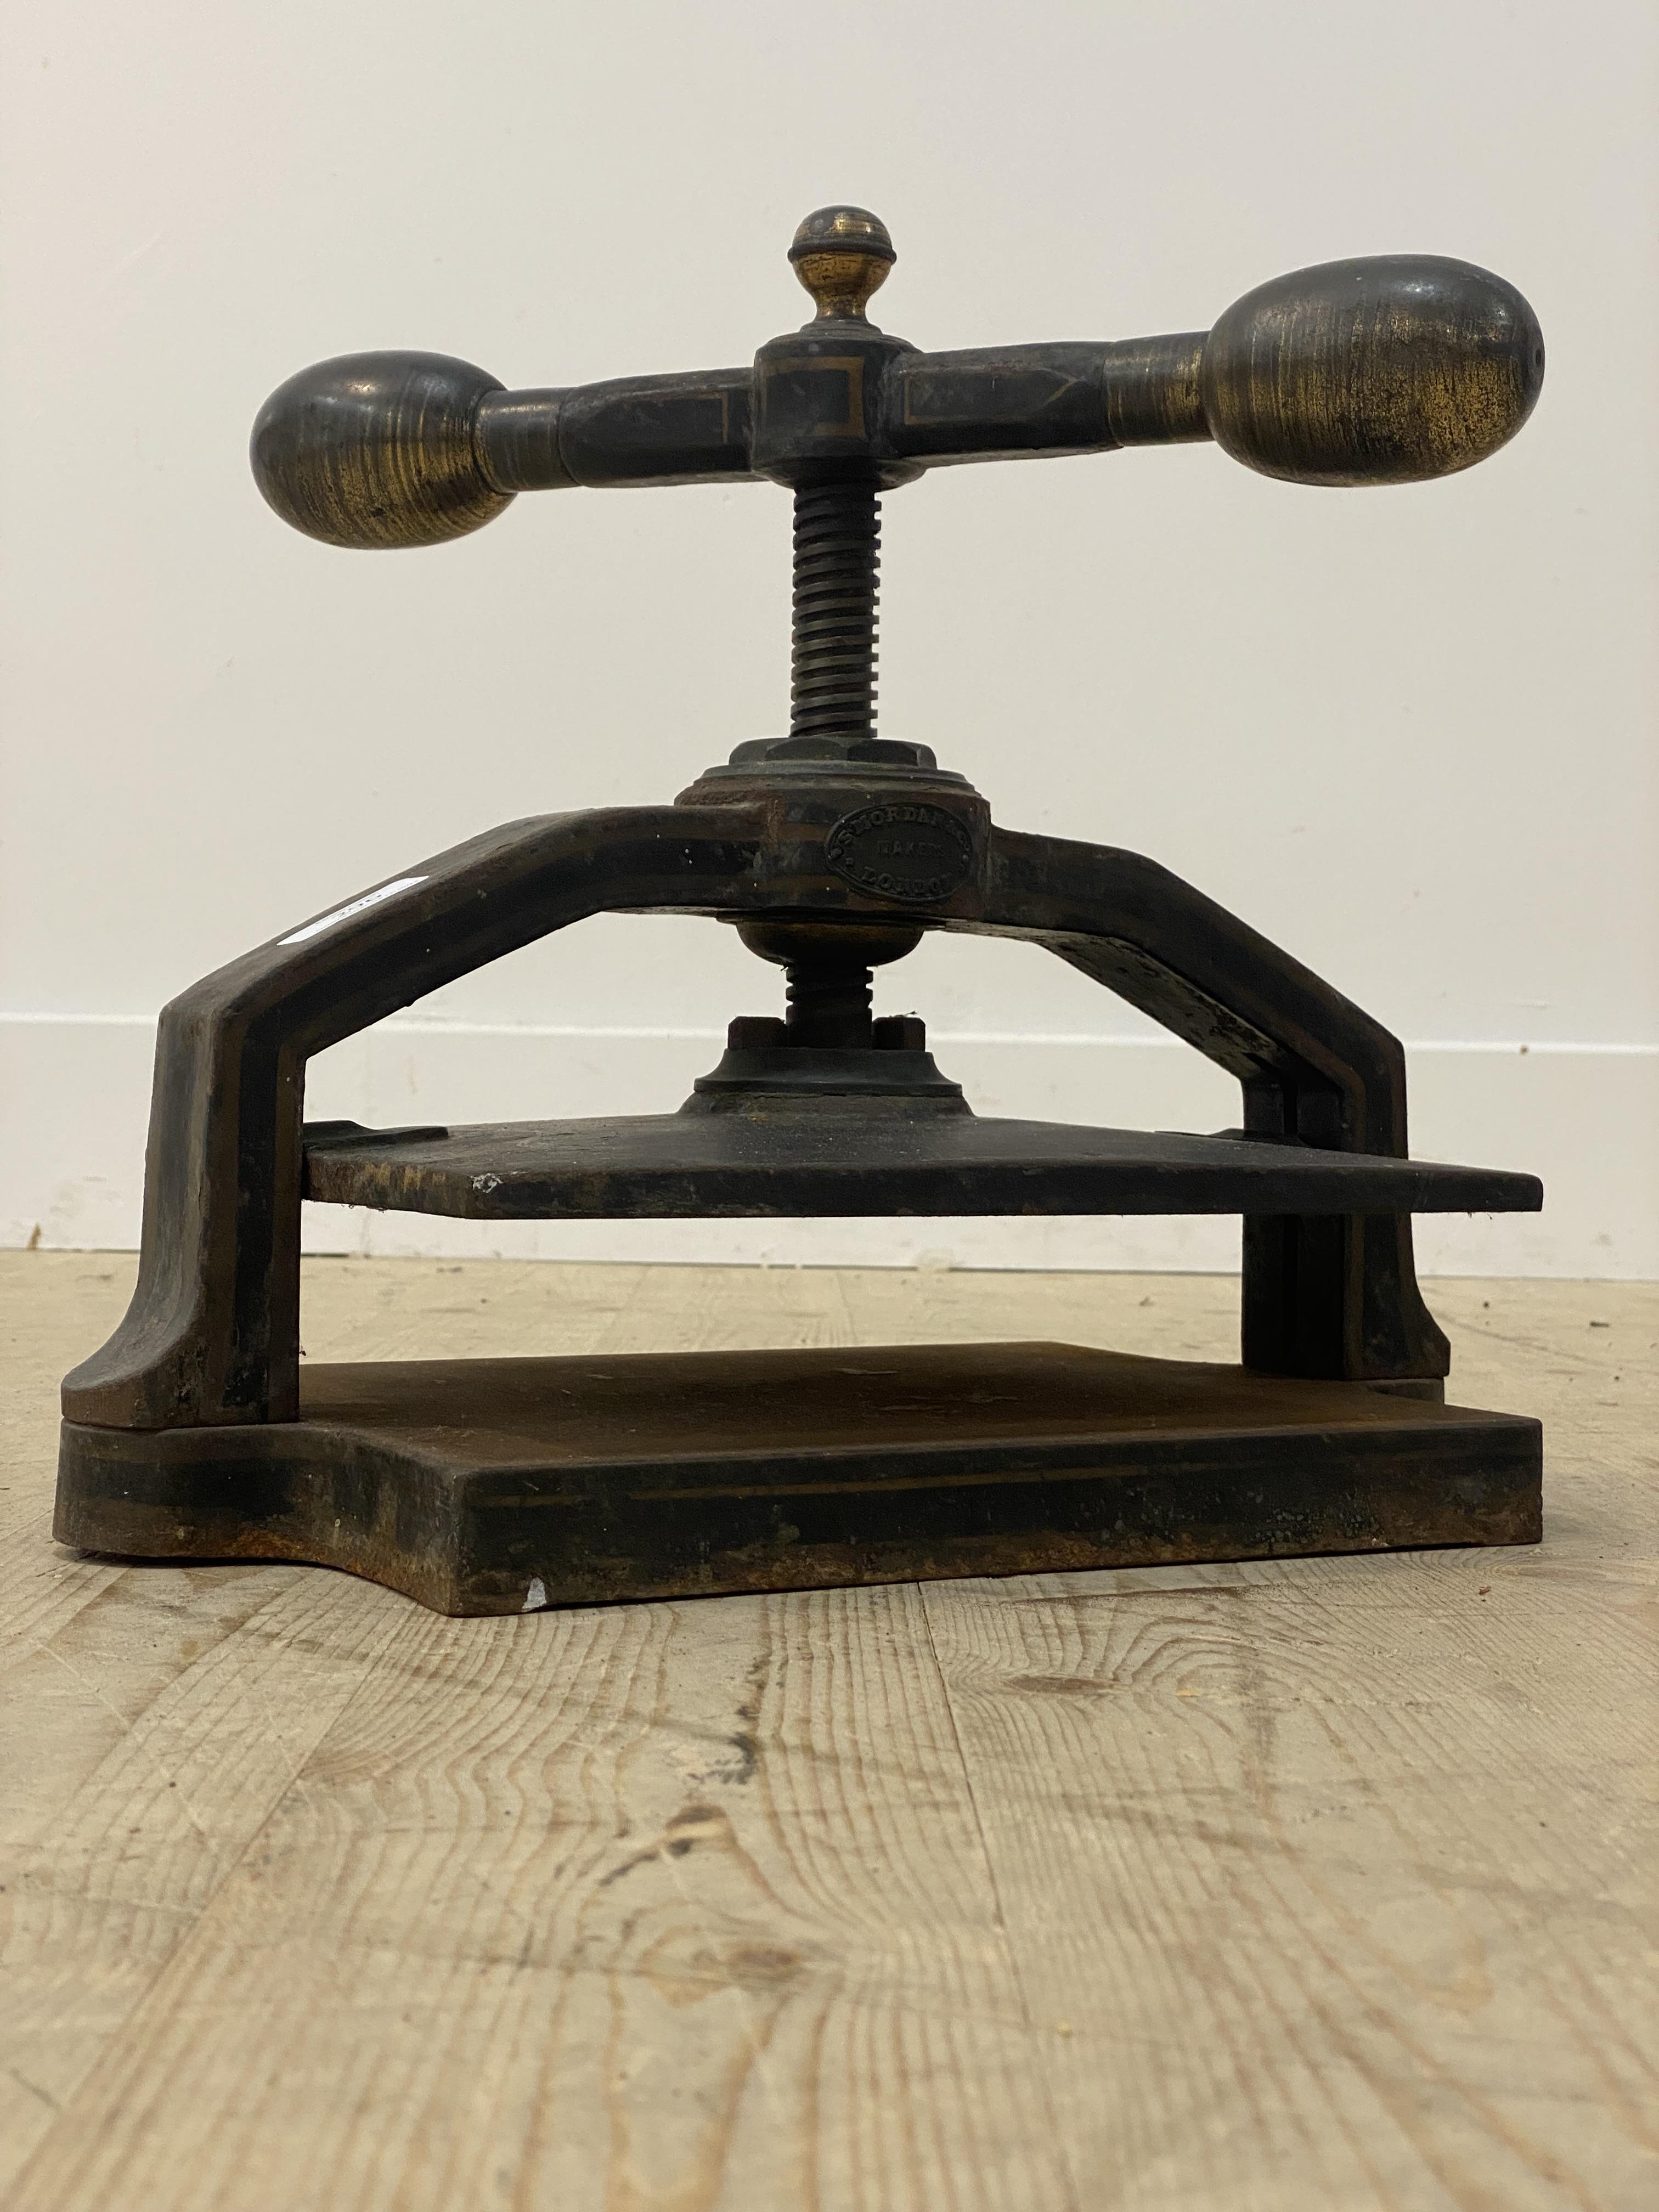 A 19th century cast iron book press by S. Mordian Co. makers, London